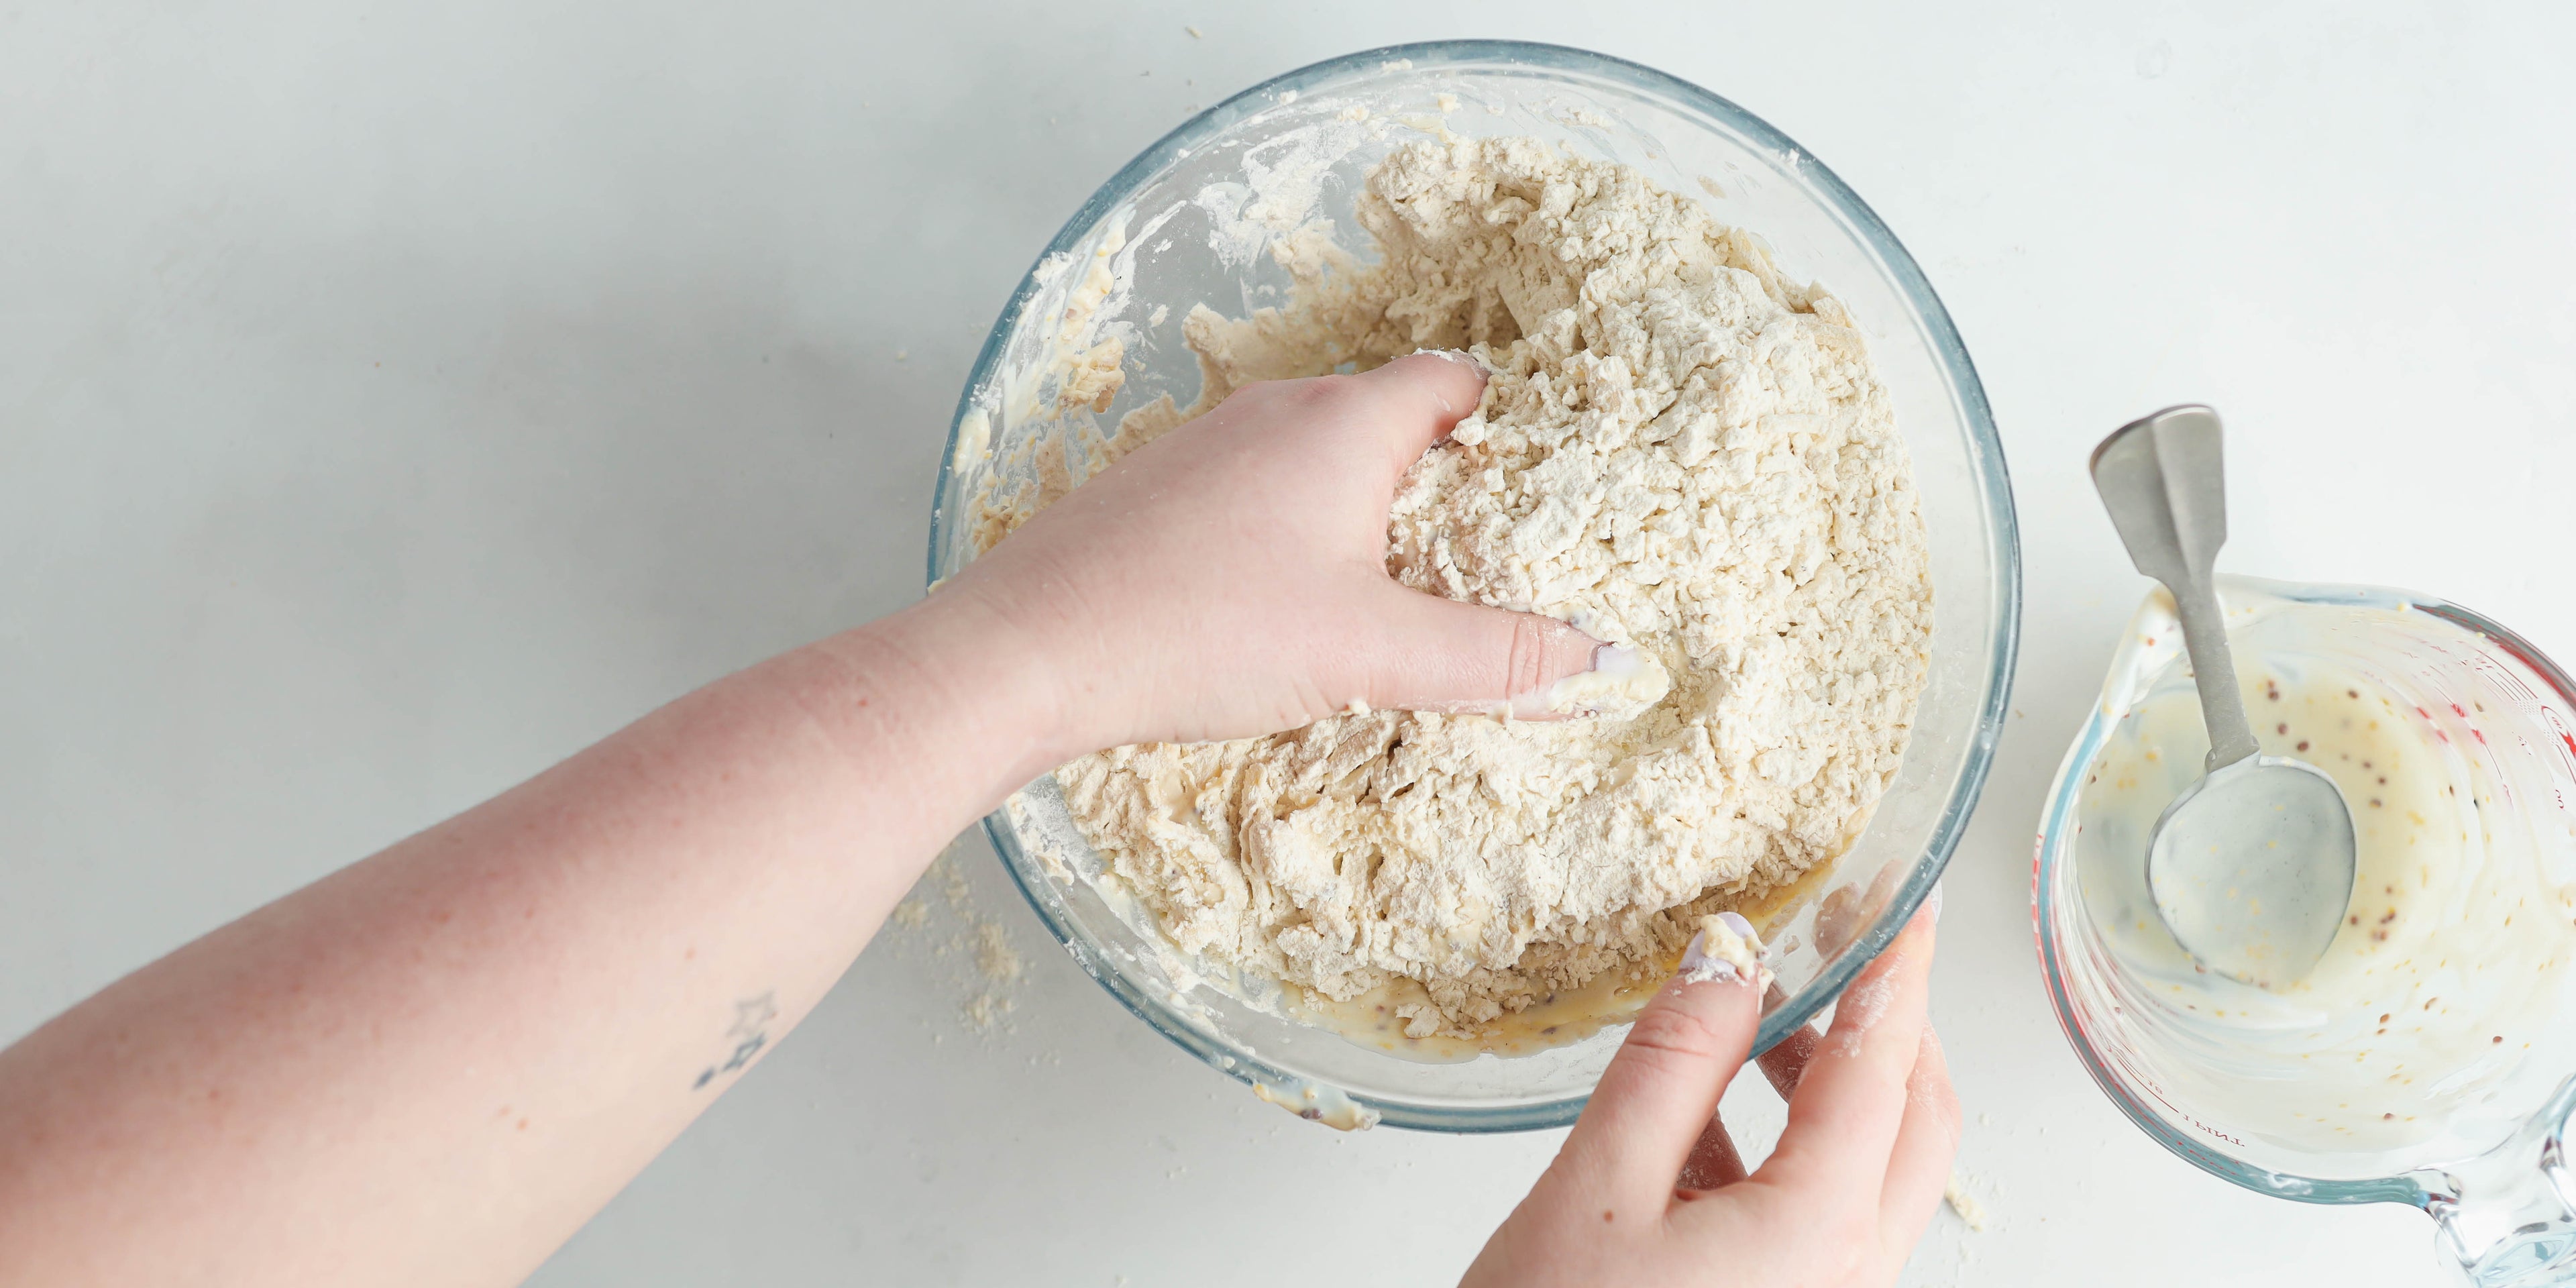 Top view of Cheese Scone dough being mixed and combined with hands crumbling the dough